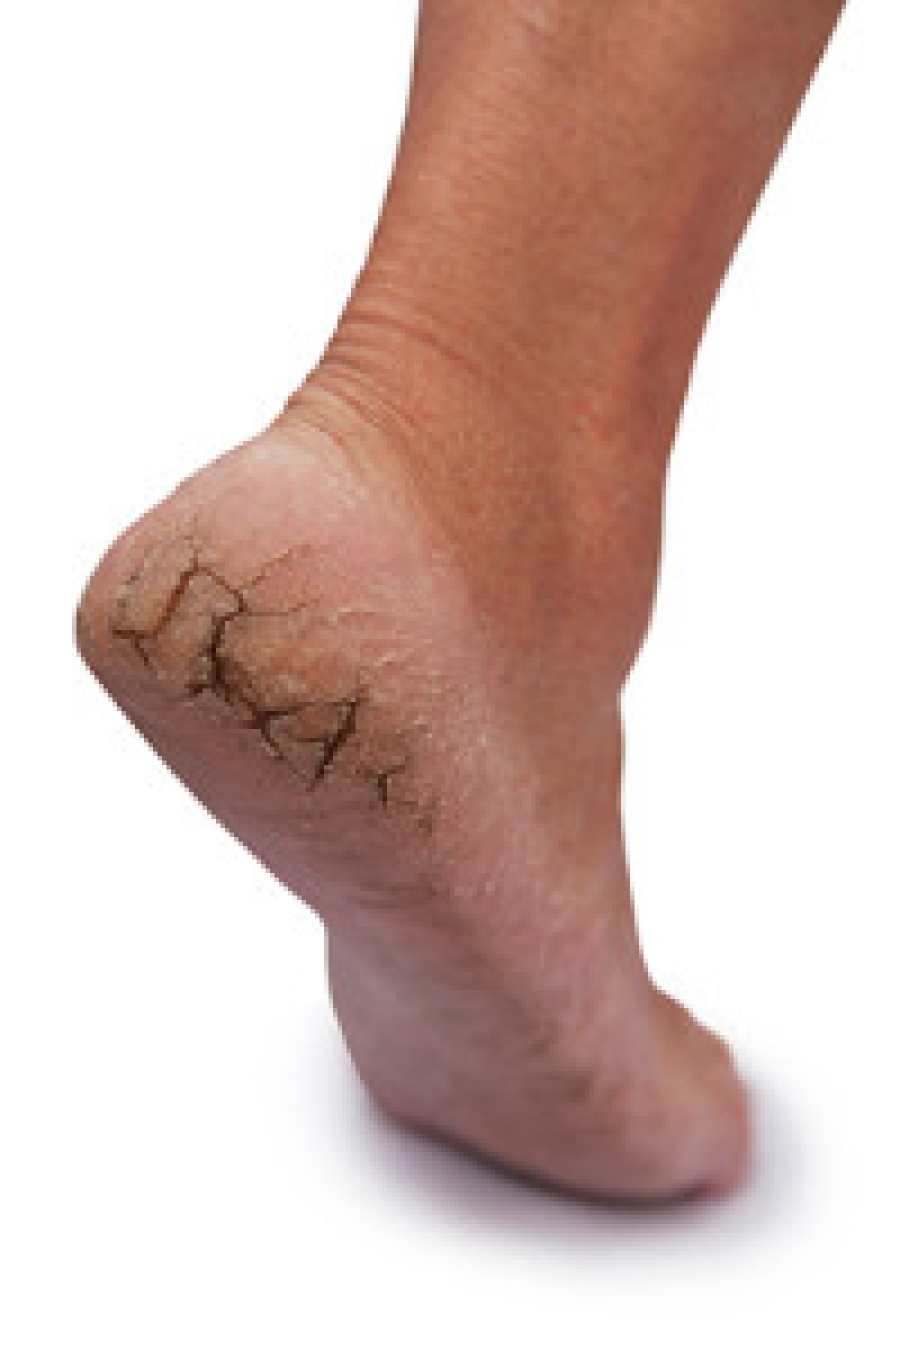 Cracked Heels: Causes and Prevention - Hurst Podiatry